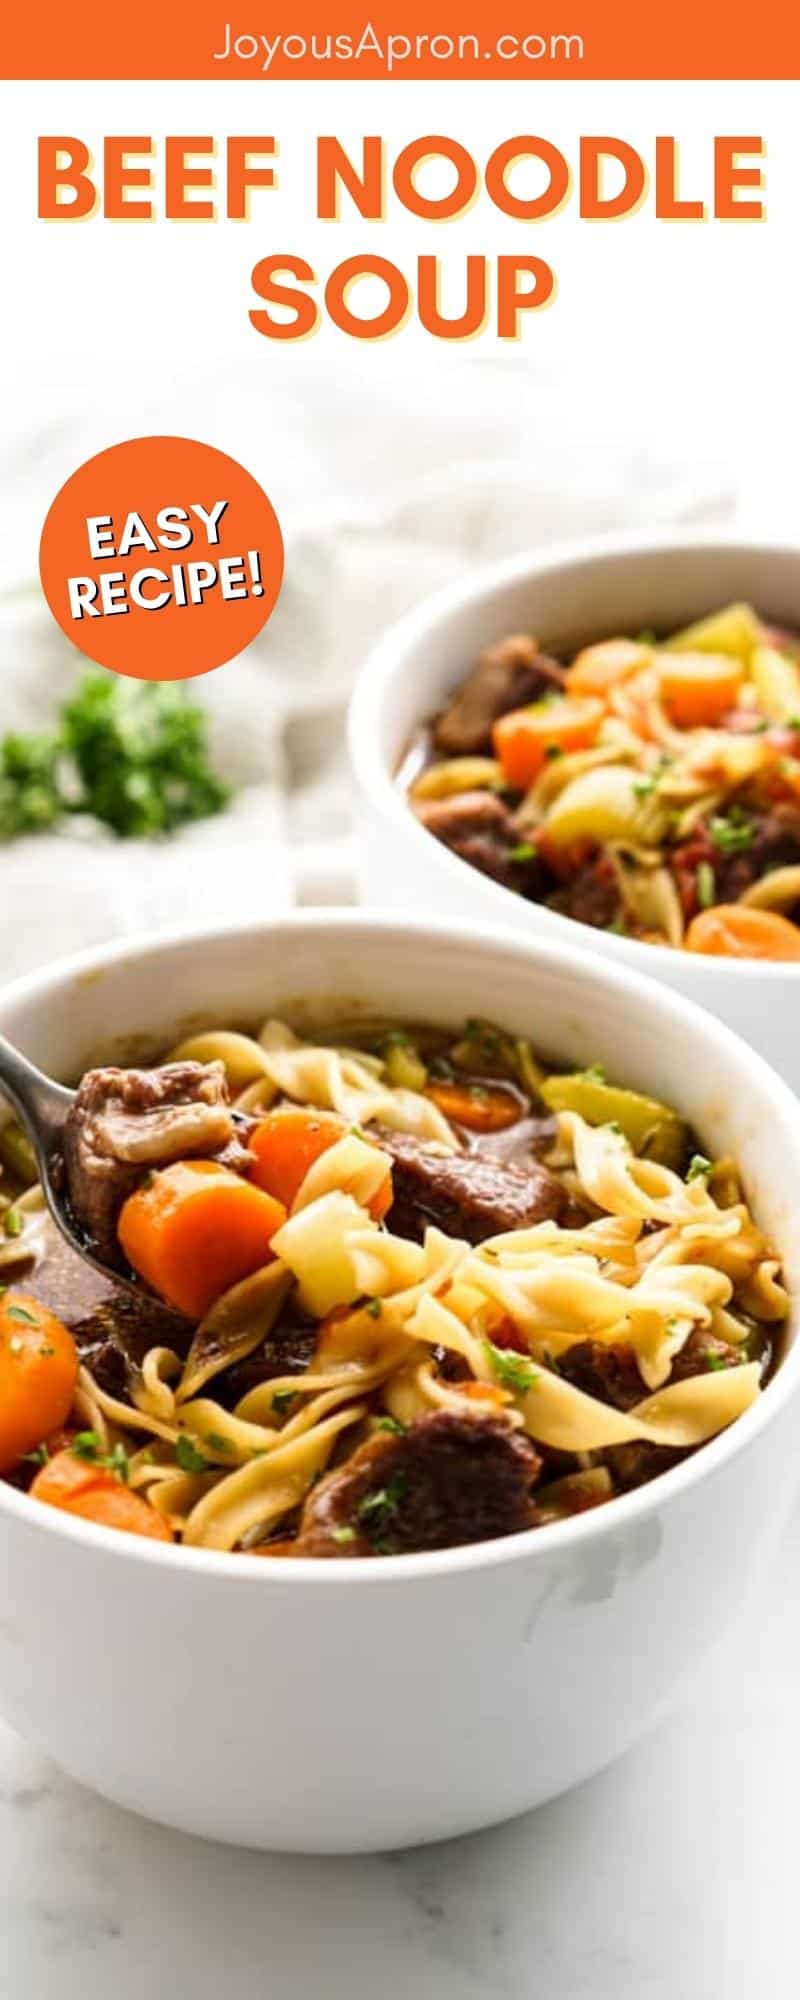 Beef Noodle Soup - tender steaks, egg noodles, carrots, celery, and tomatoes simmered in flavorful herb-infused beef broth. Cozy and comforting soup recipe for the Fall and winter! via @joyousapron